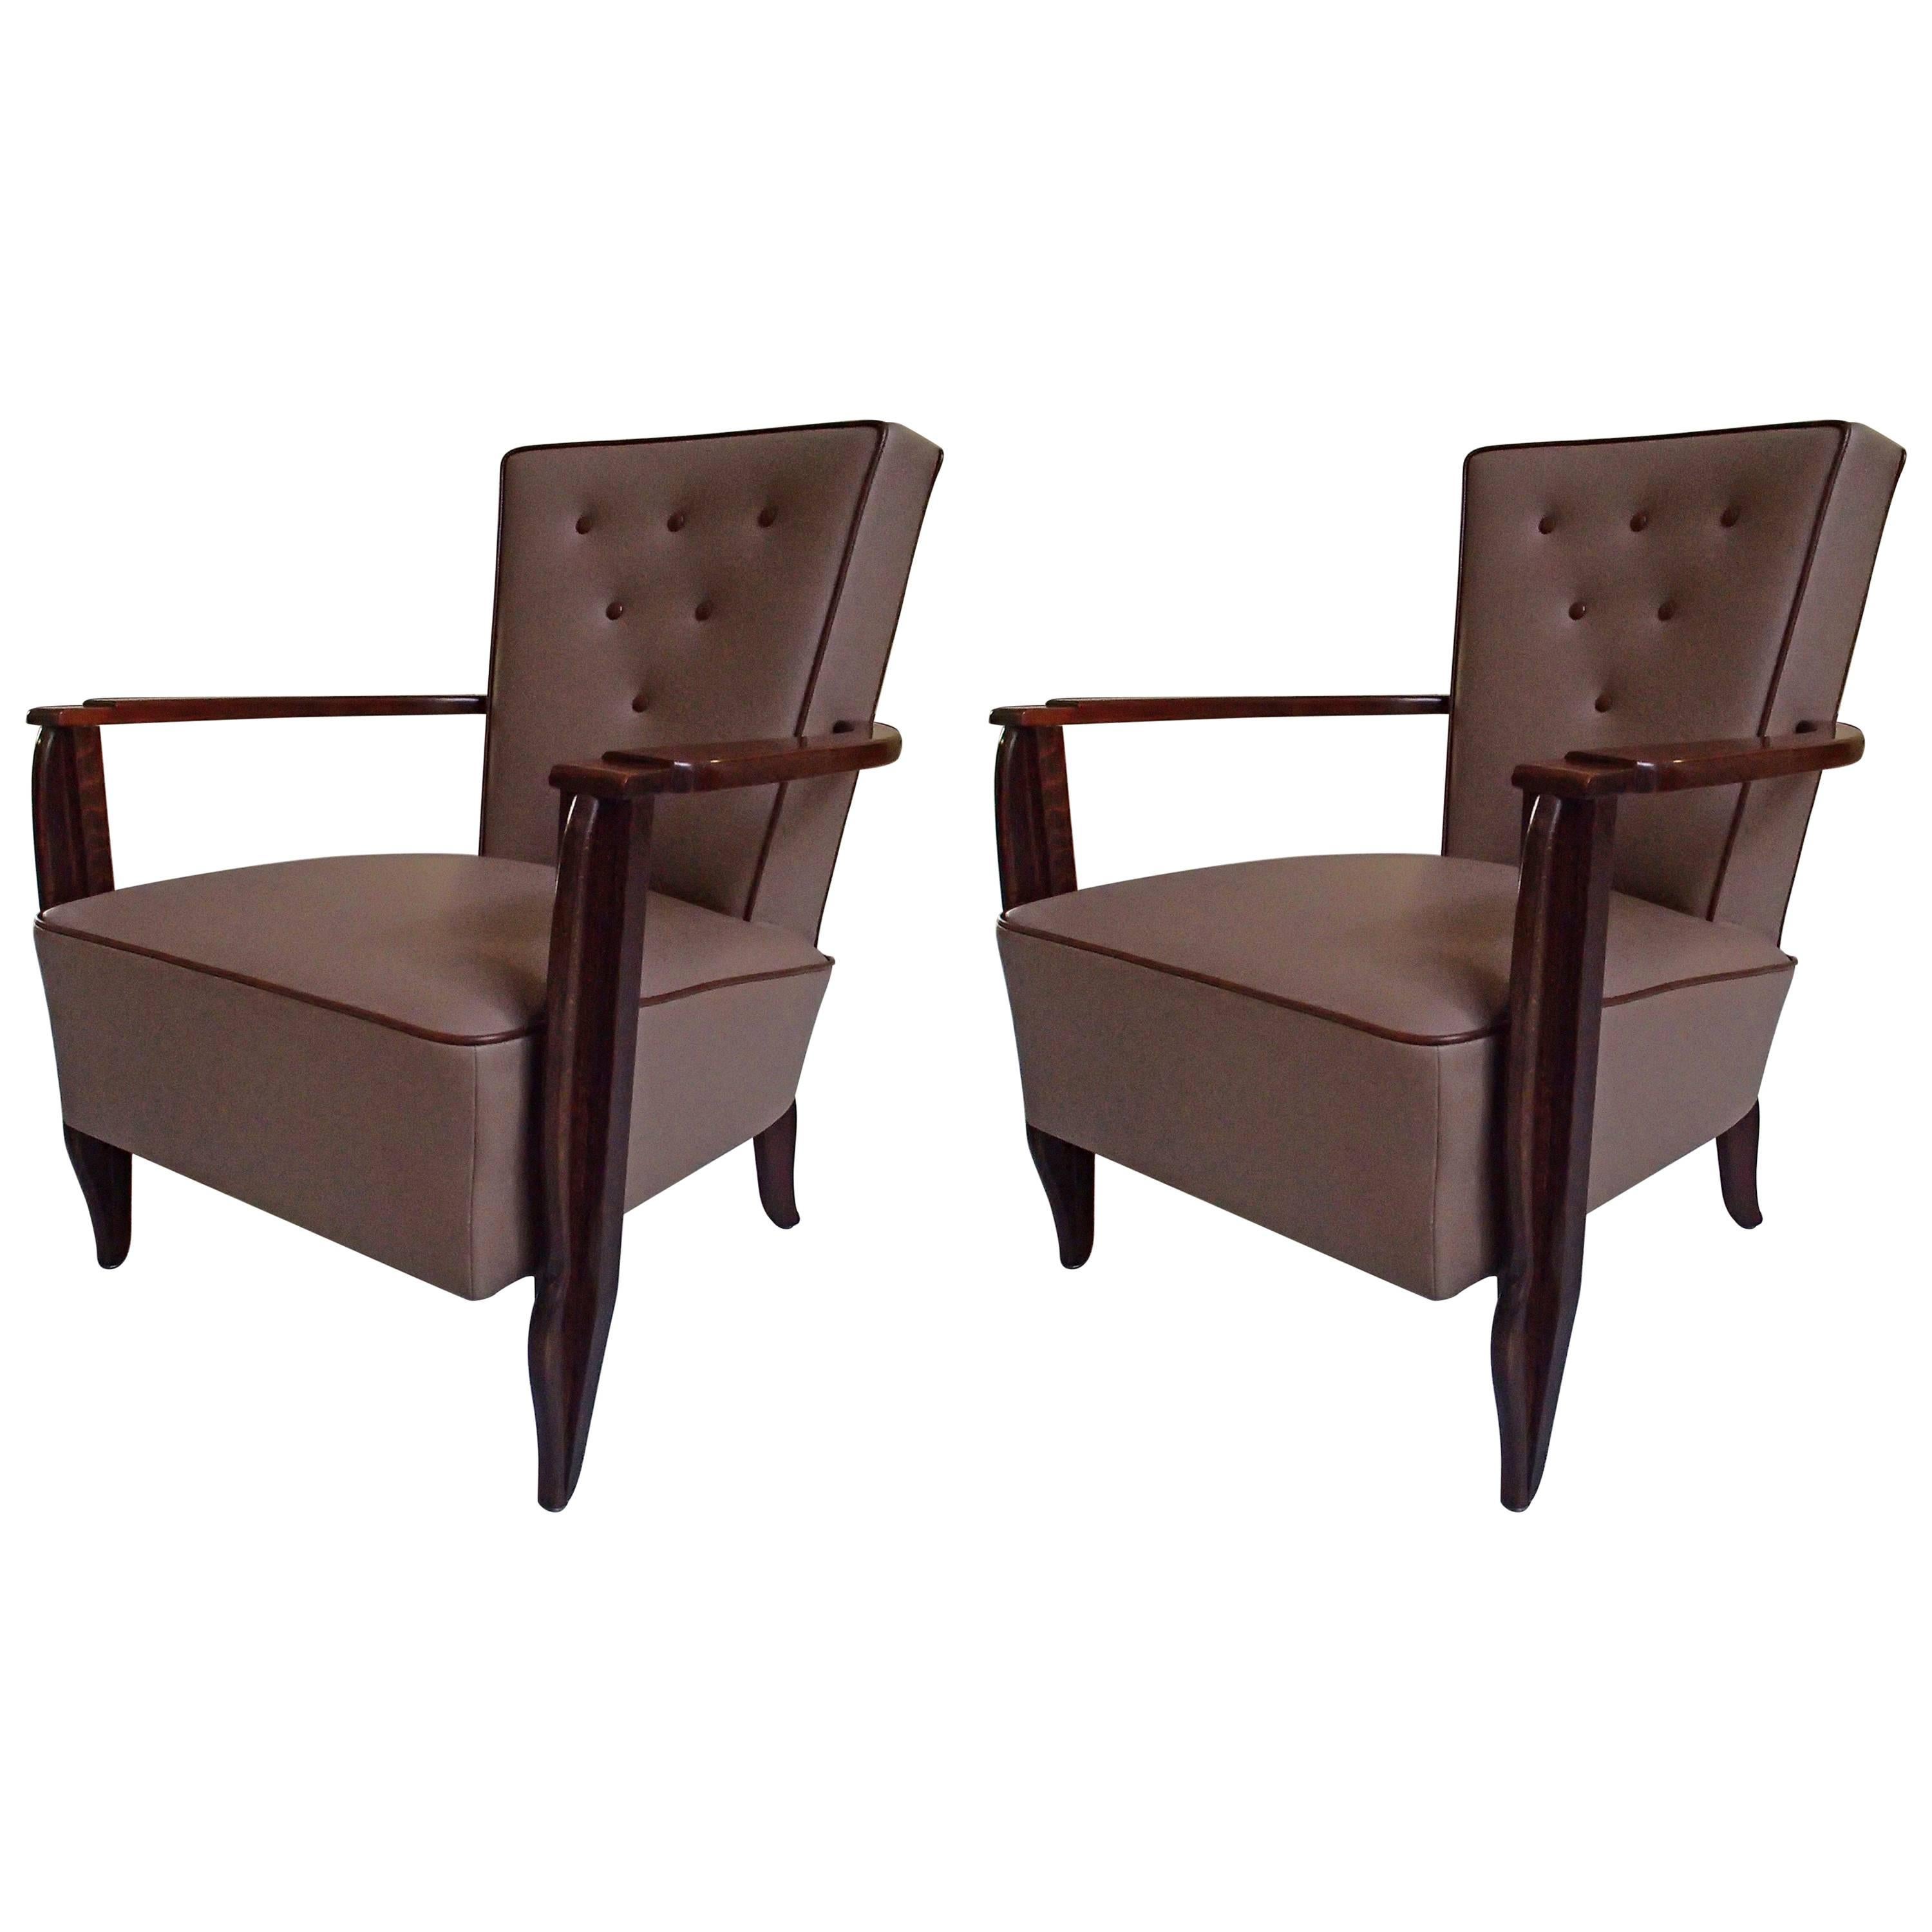 Pair of 1940 Leather Lounge Chairs